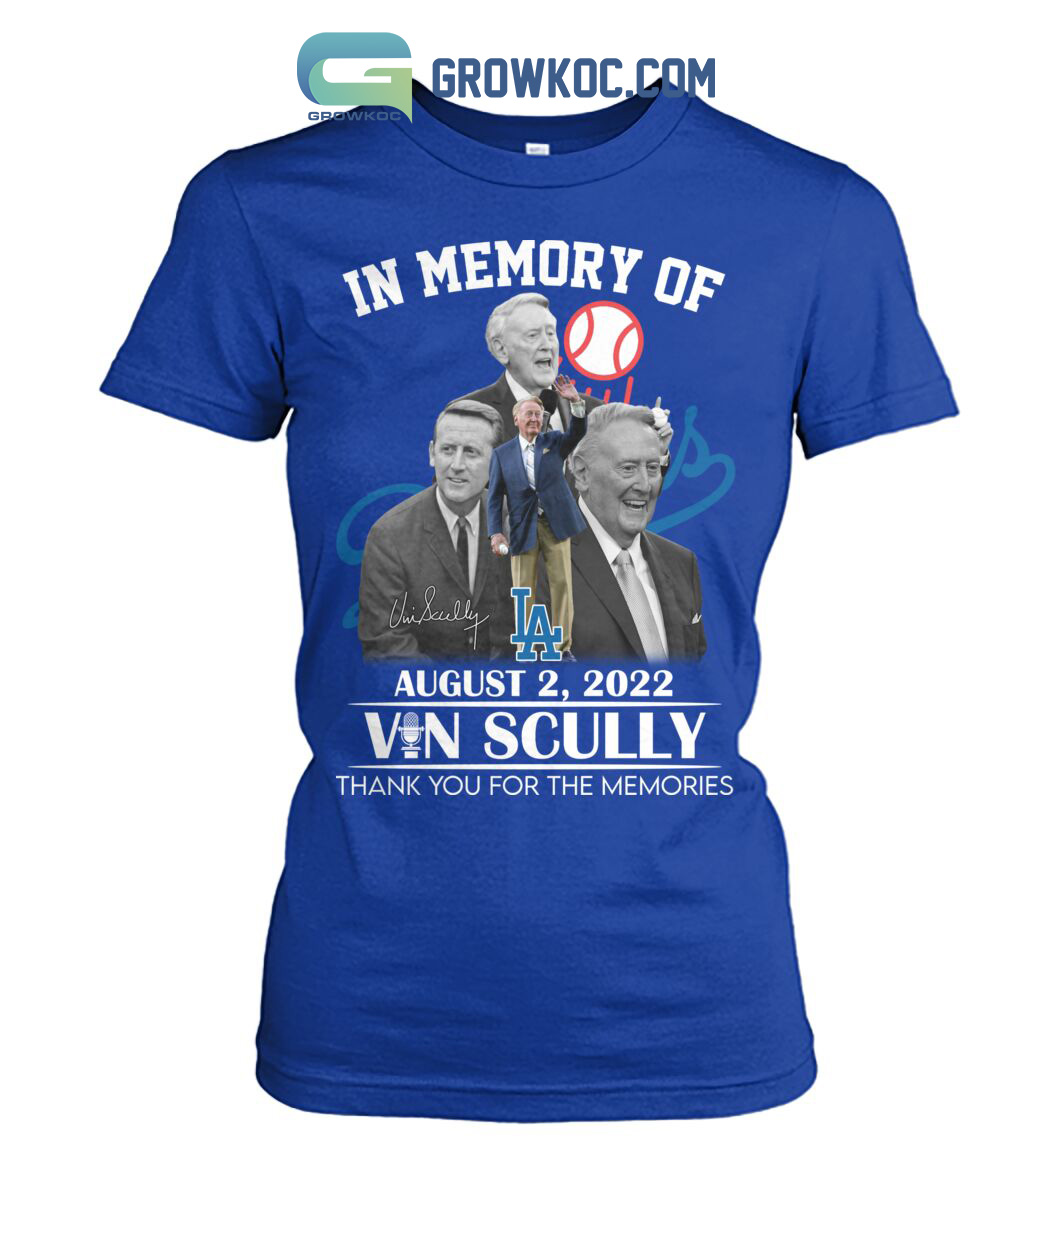 In Memory Of Vin Scully Memories T Shirt - Growkoc